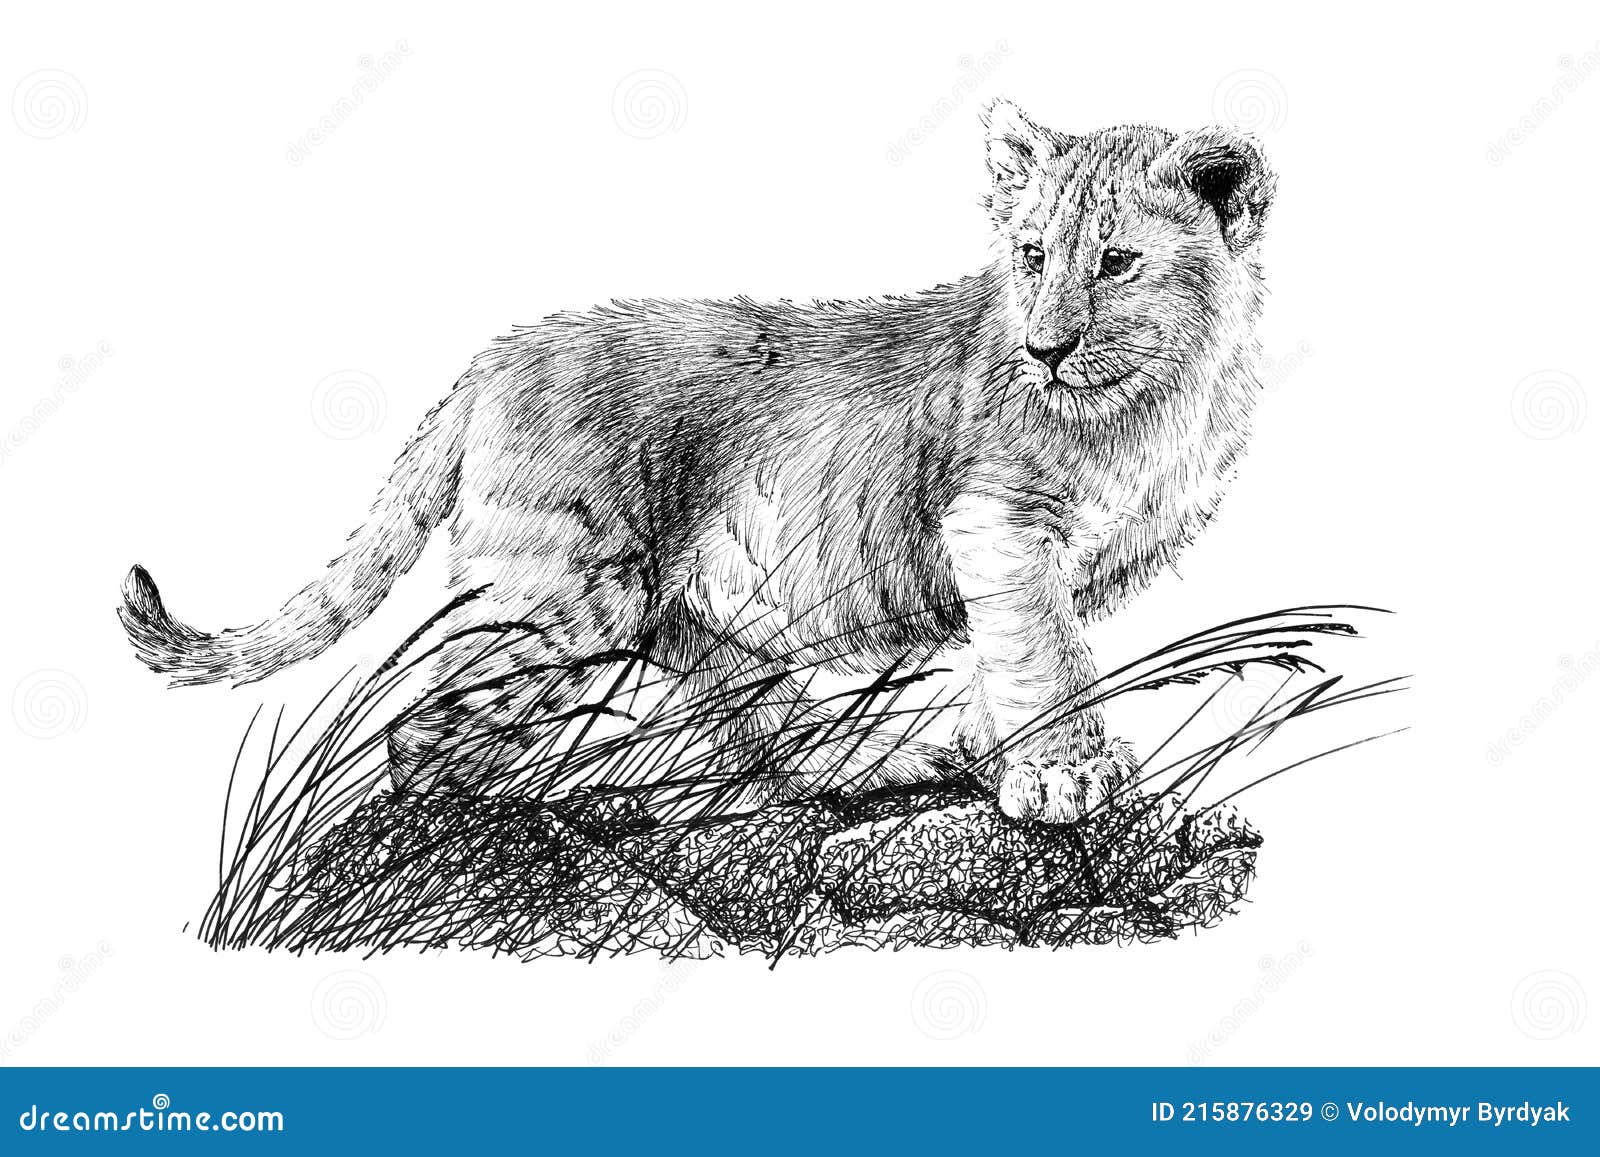 Lion cub face hand drawn sketch in doodle style Vector Image